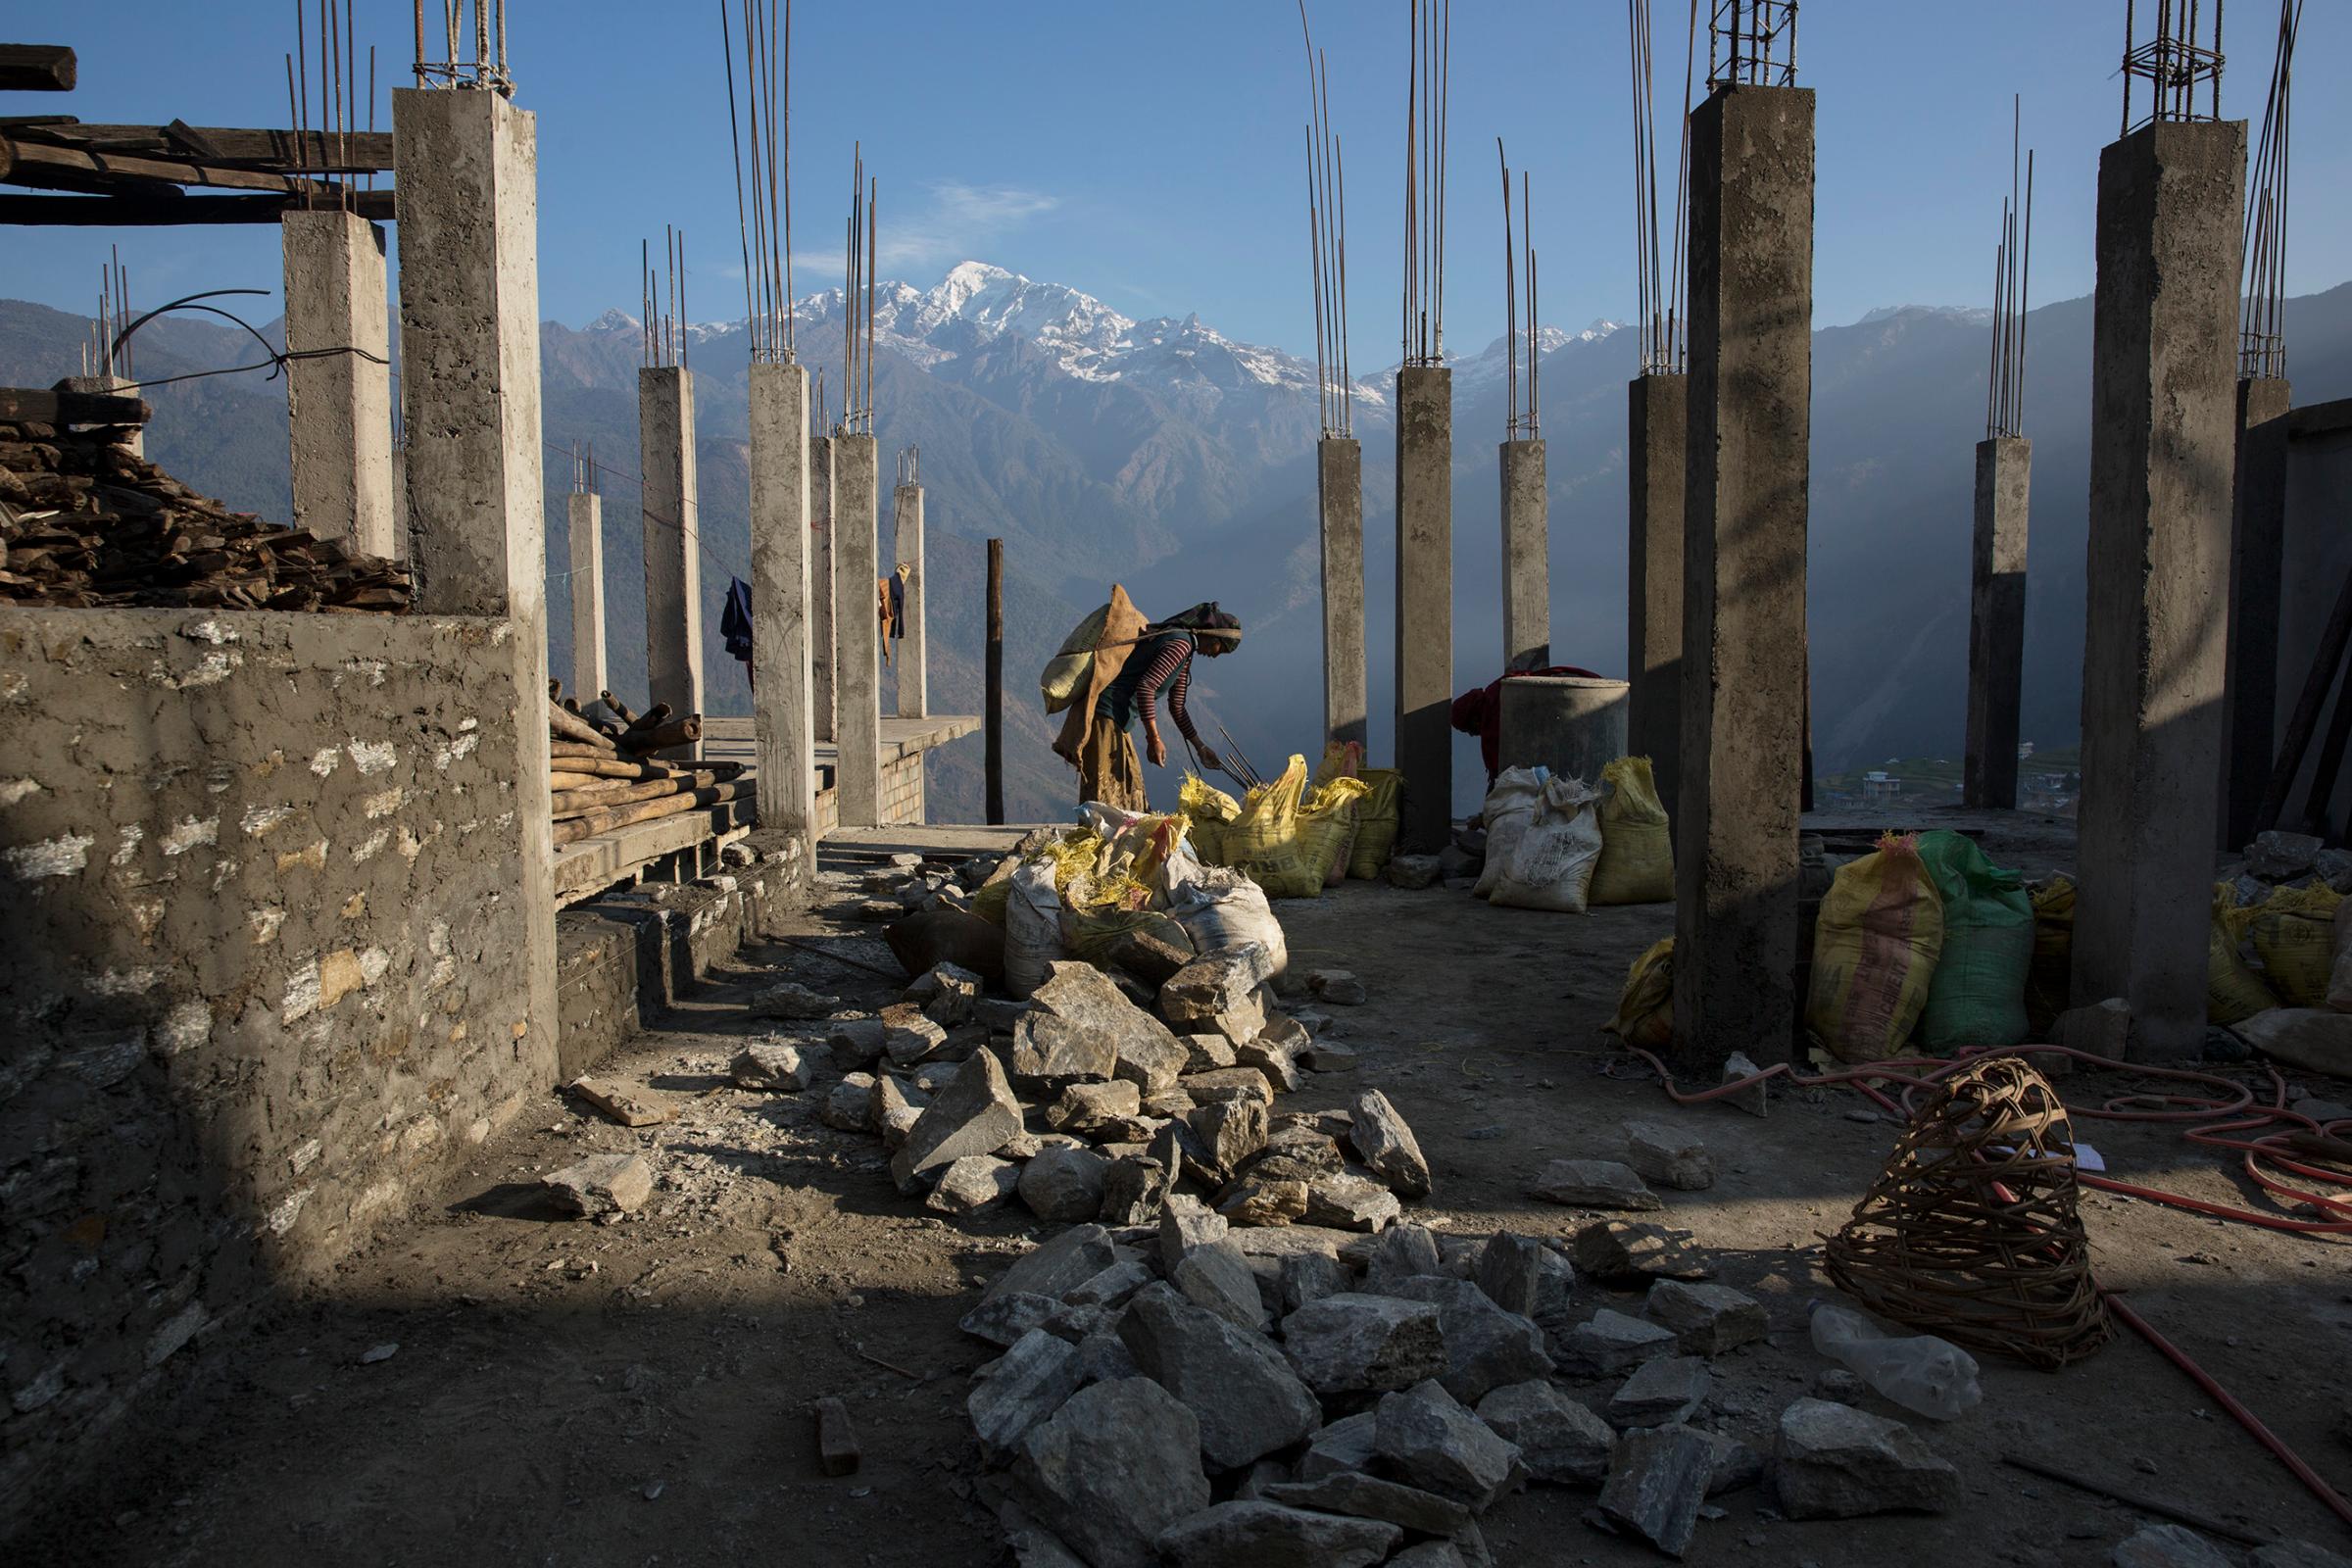 The village of Barpak, in Gorkha district, close to the epicenter of the earthquake, which destroyed almost the entire village. Villagers rebuilding houses and pathways and building a new religious stupa. Much of the work is accomplished communally. Buddha Himal mountain in background.by James Nachtwey